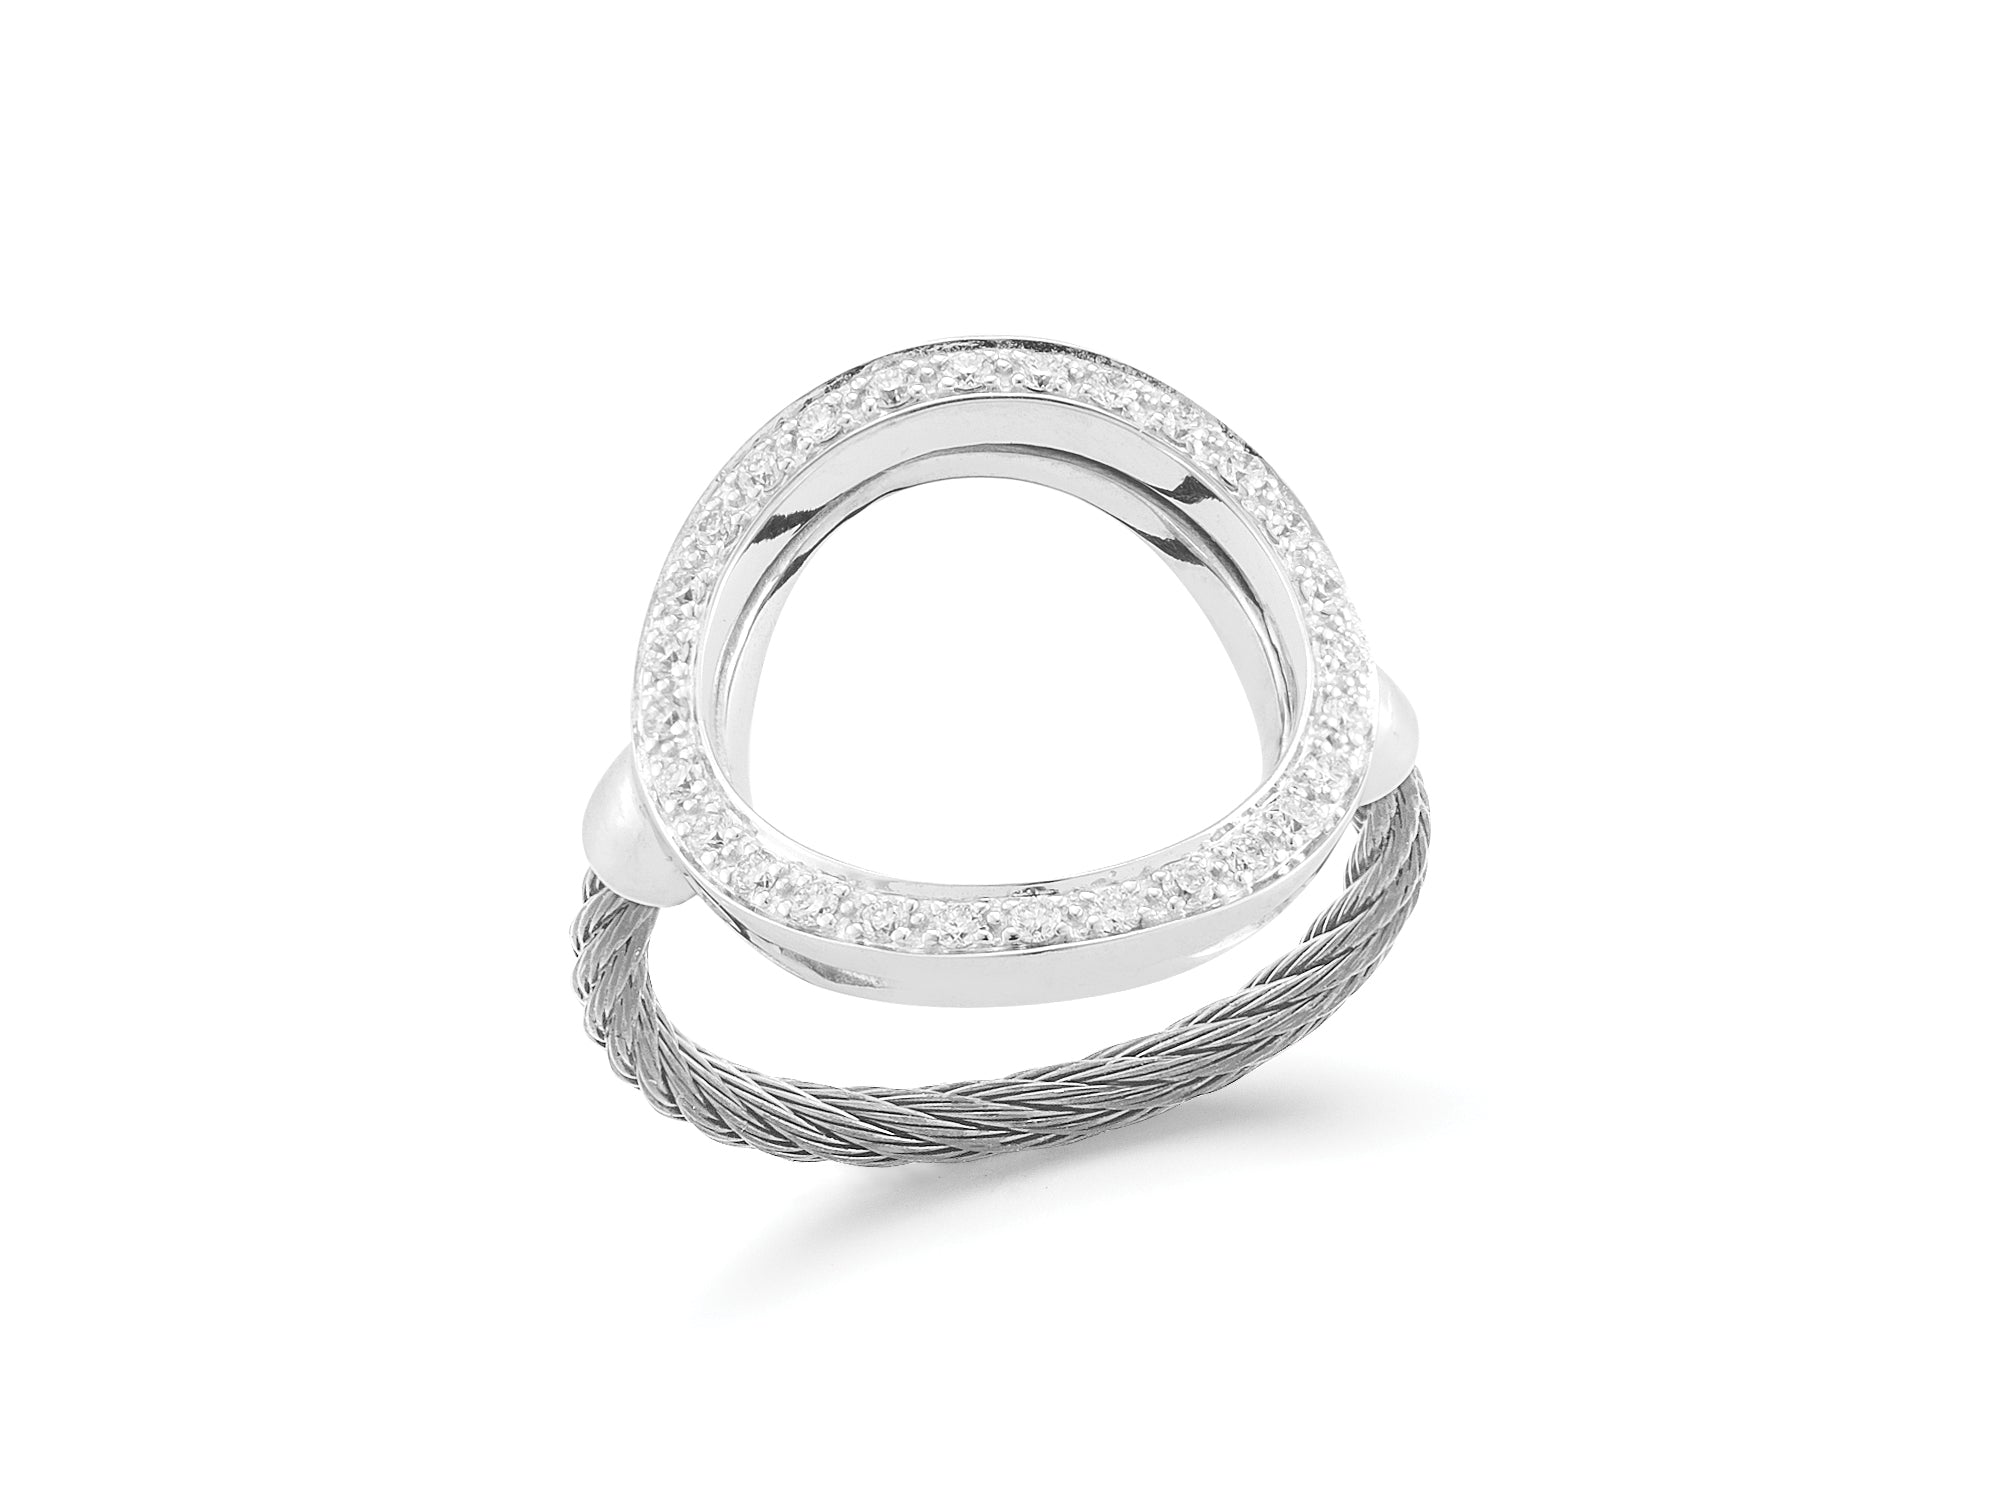 Alor Grey cable, 18 karat White Gold, 0.23 total carat weight Diamonds and stainless steel. Imported.